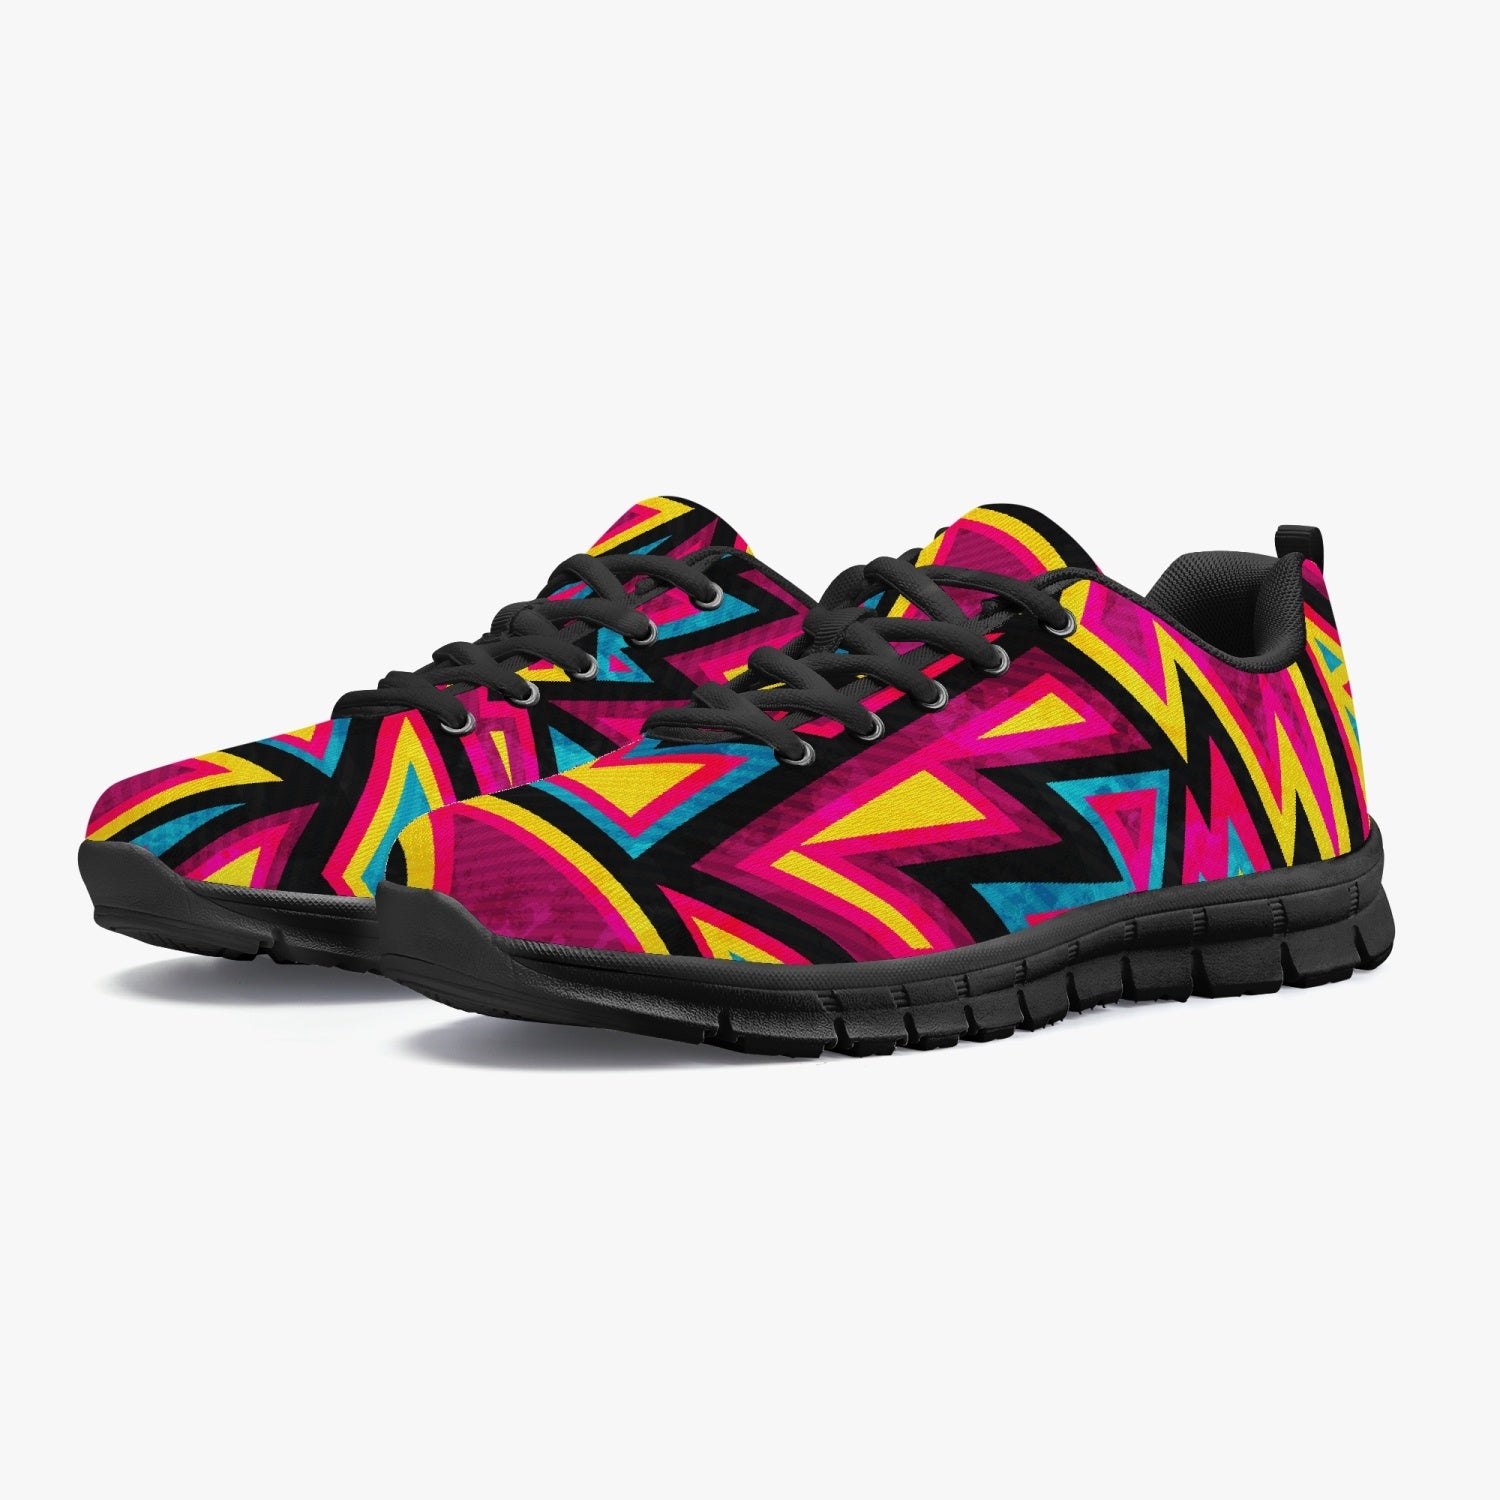 Women's Ultimate Neon Raver Aztec Warrior Gym Workout Sneakers Overview